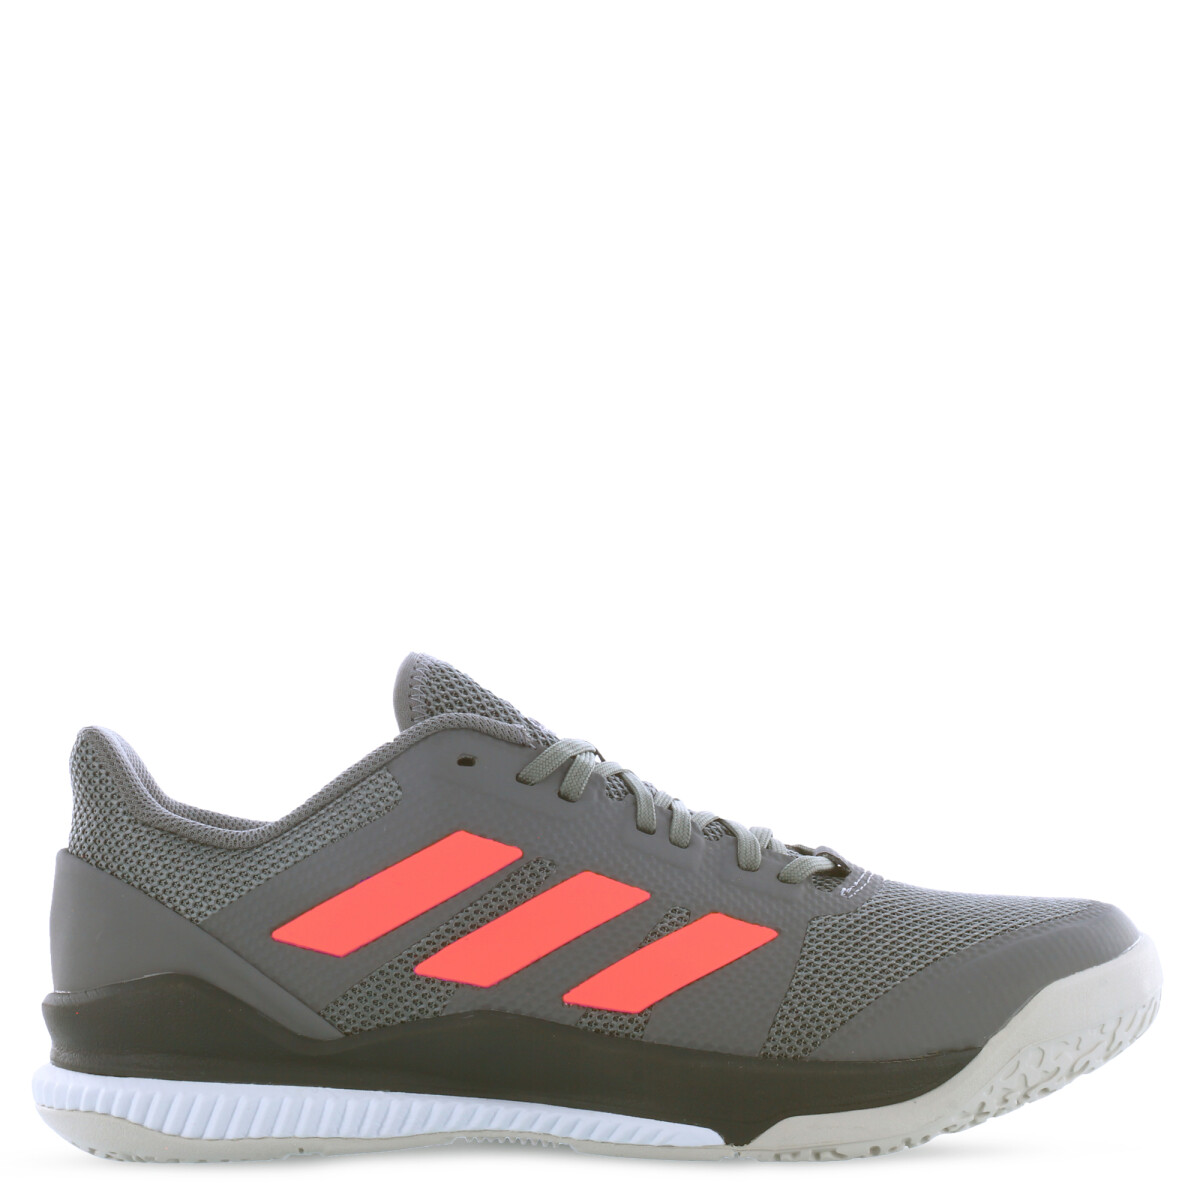 Stabil Bounce Adidas - Gris/Coral 